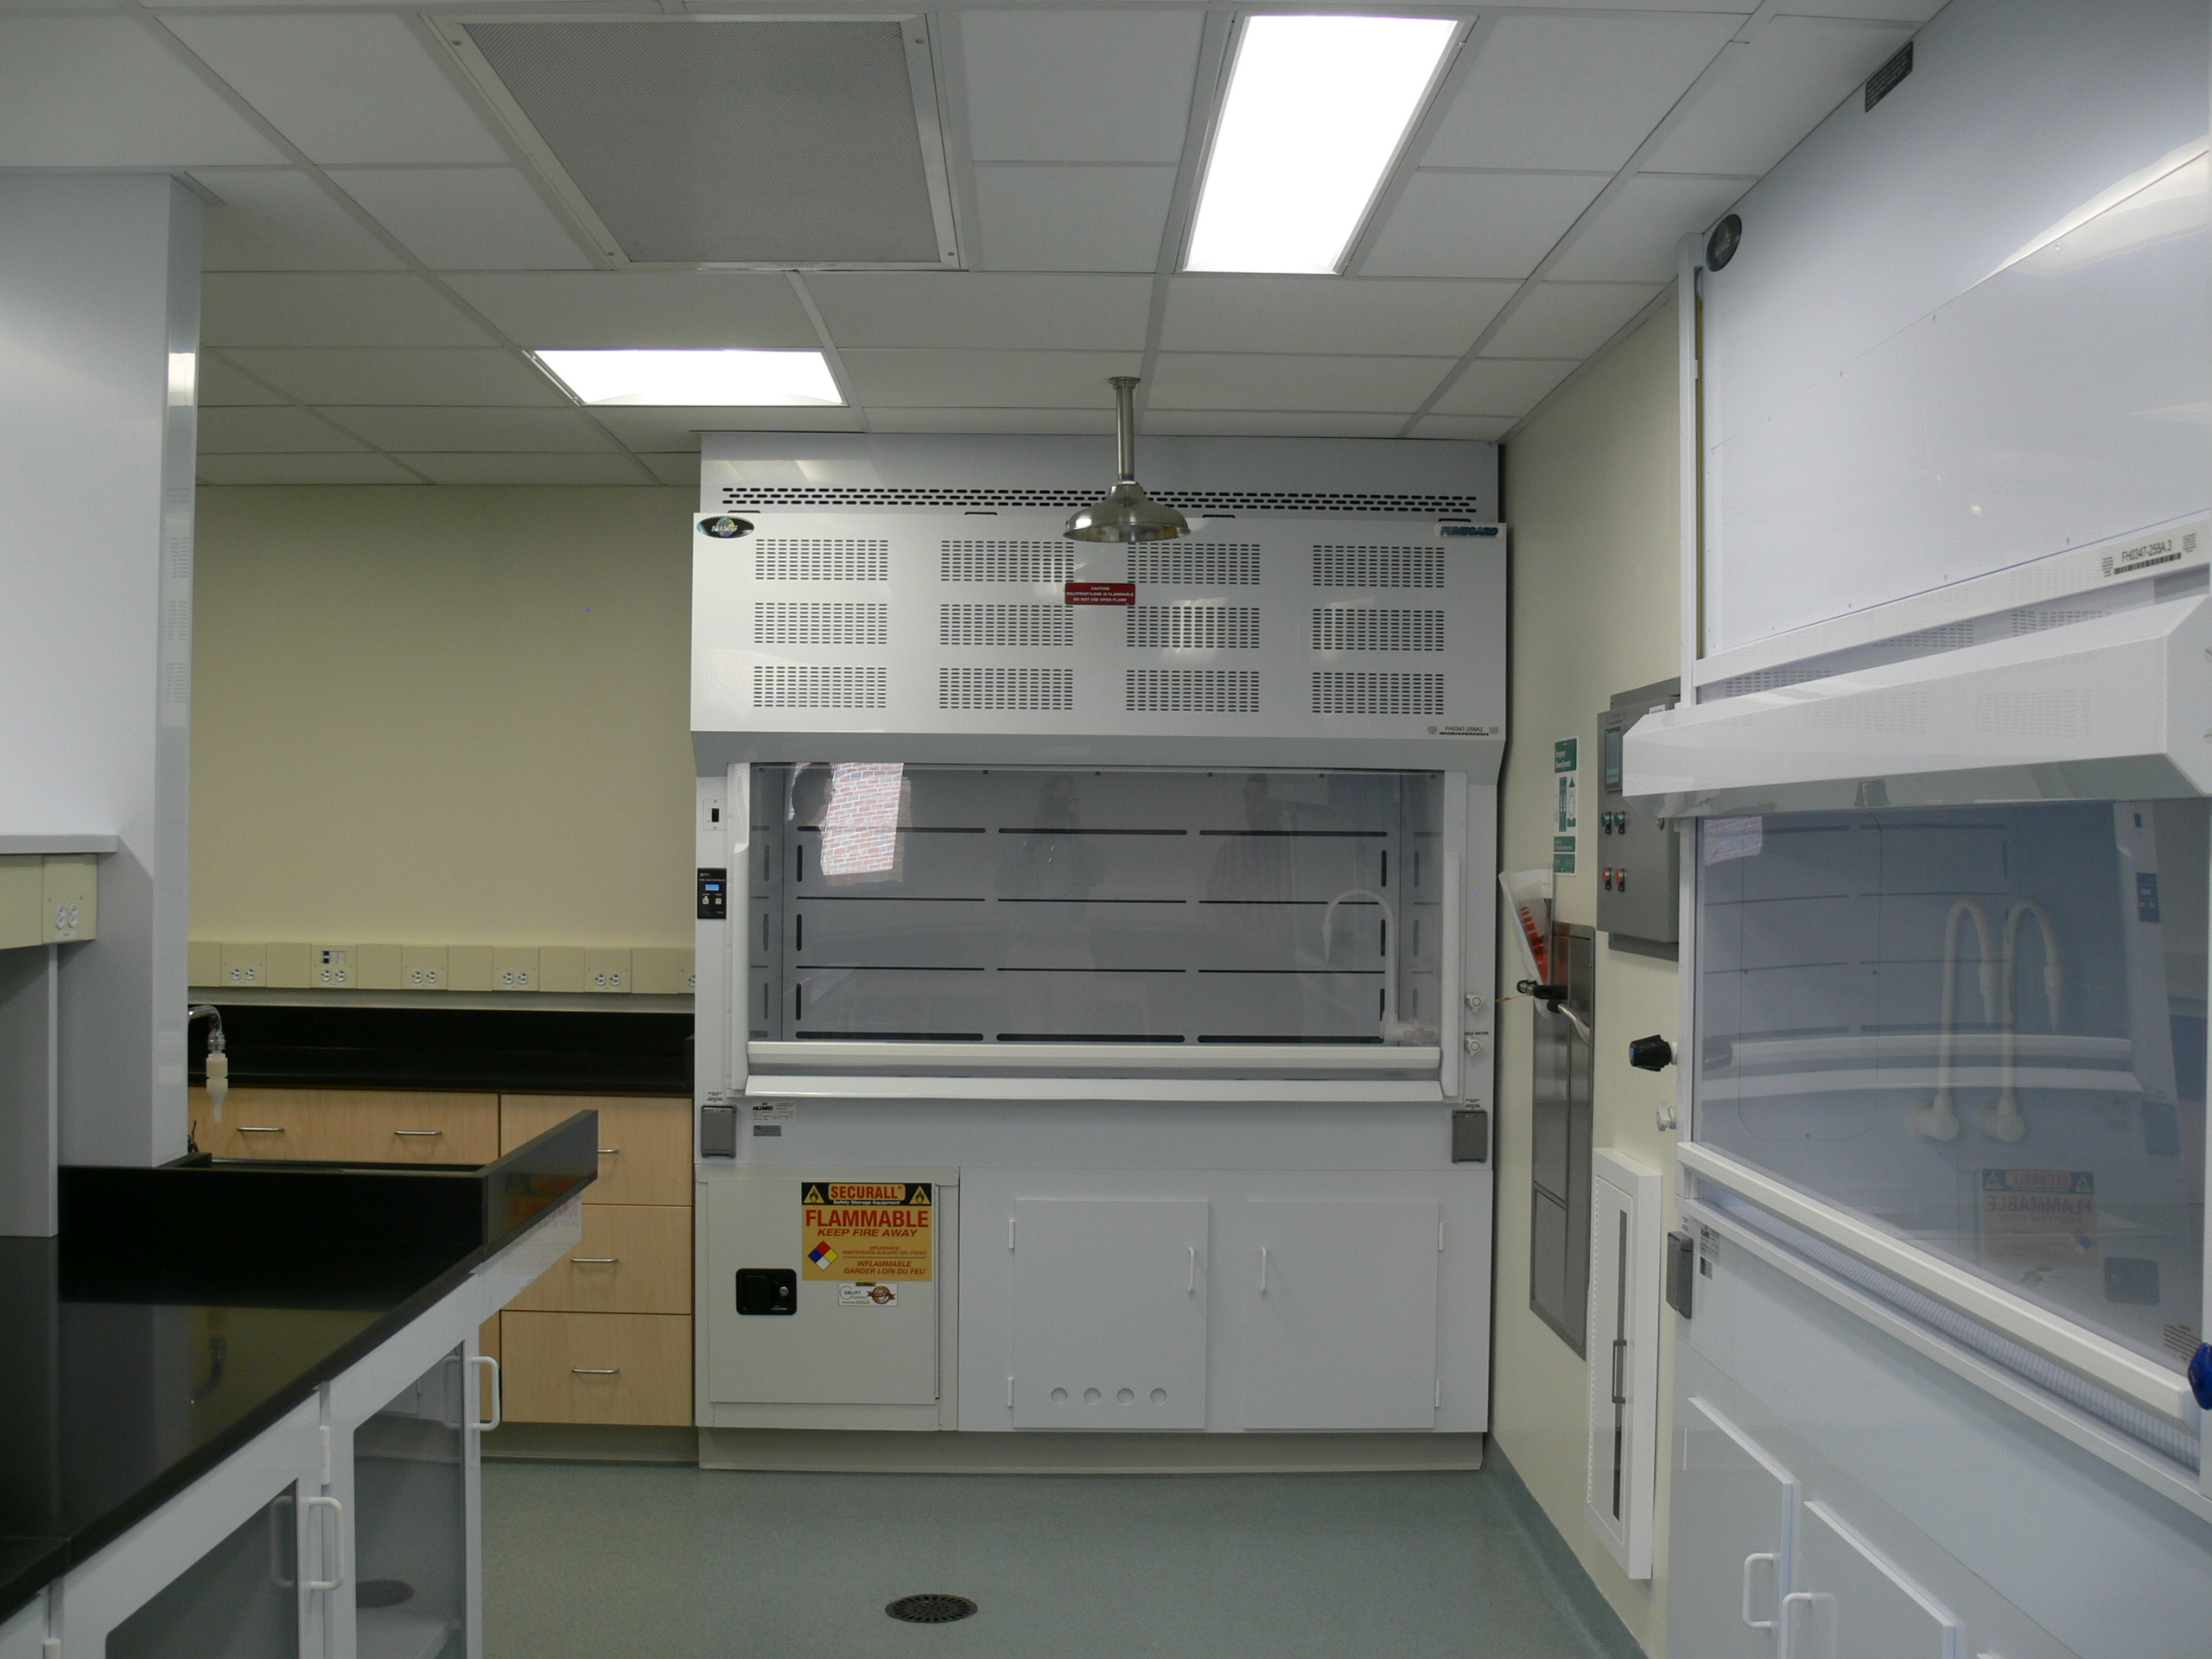 Interior, Morrill Trace Metals Research Laboratory at UMass Amherst, work stations, fume hoods